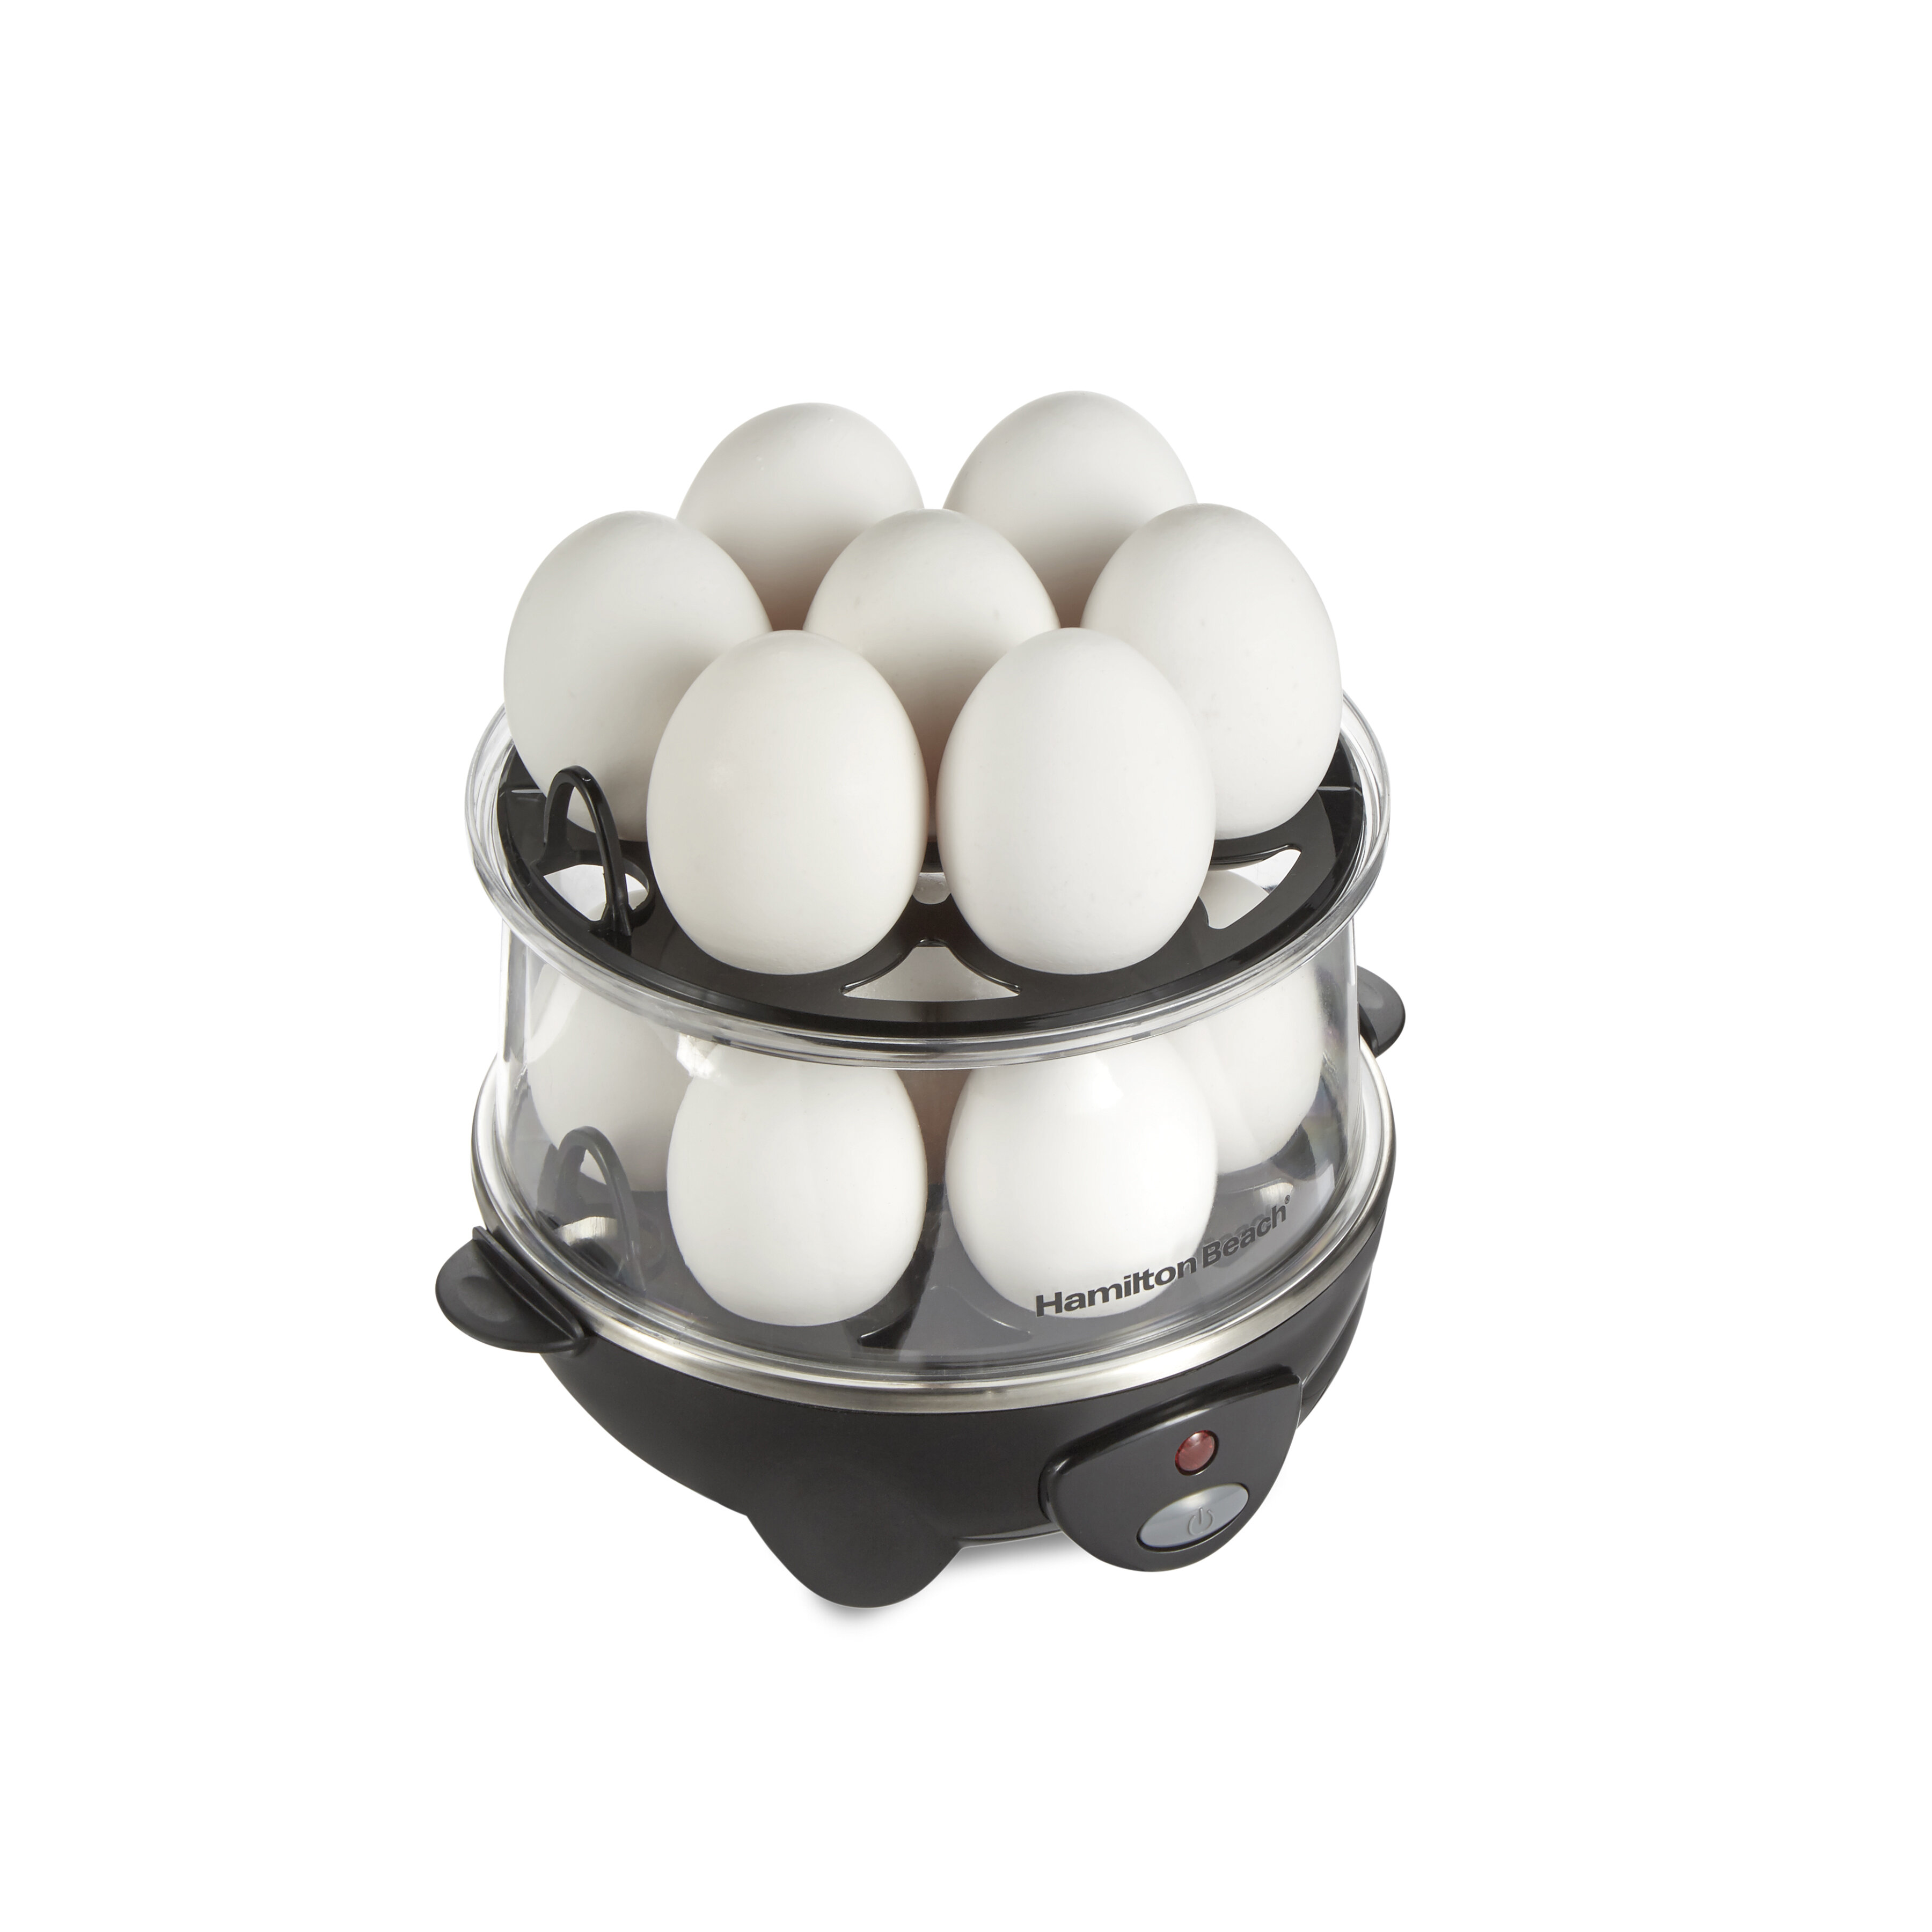 DASH Deluxe Electric Egg Cooker with 12 Egg Capacity in Black